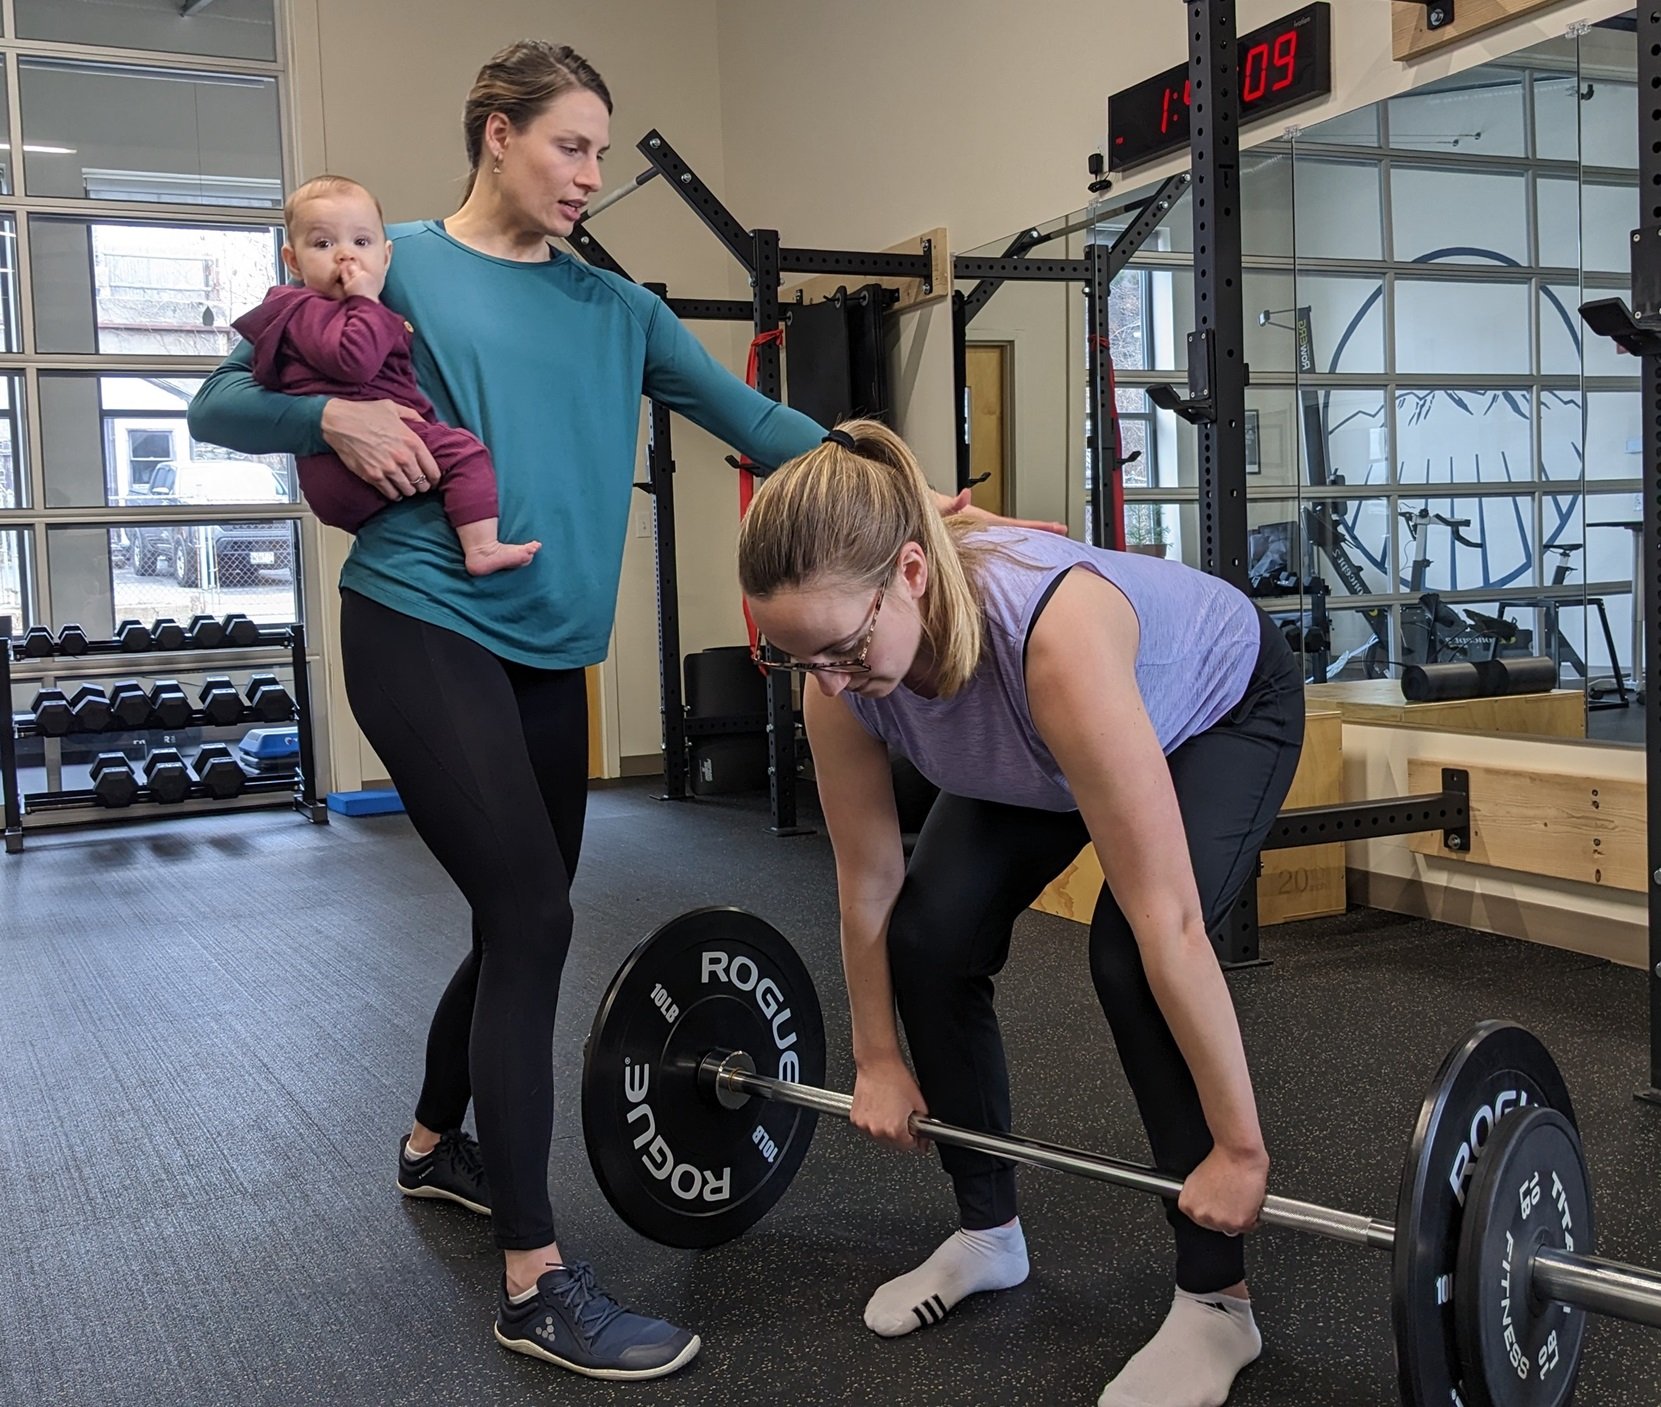 A pelvic floor physical therapist giving a patient cues for her deadlifting form while holding the patient's young baby, in Portland Maine.